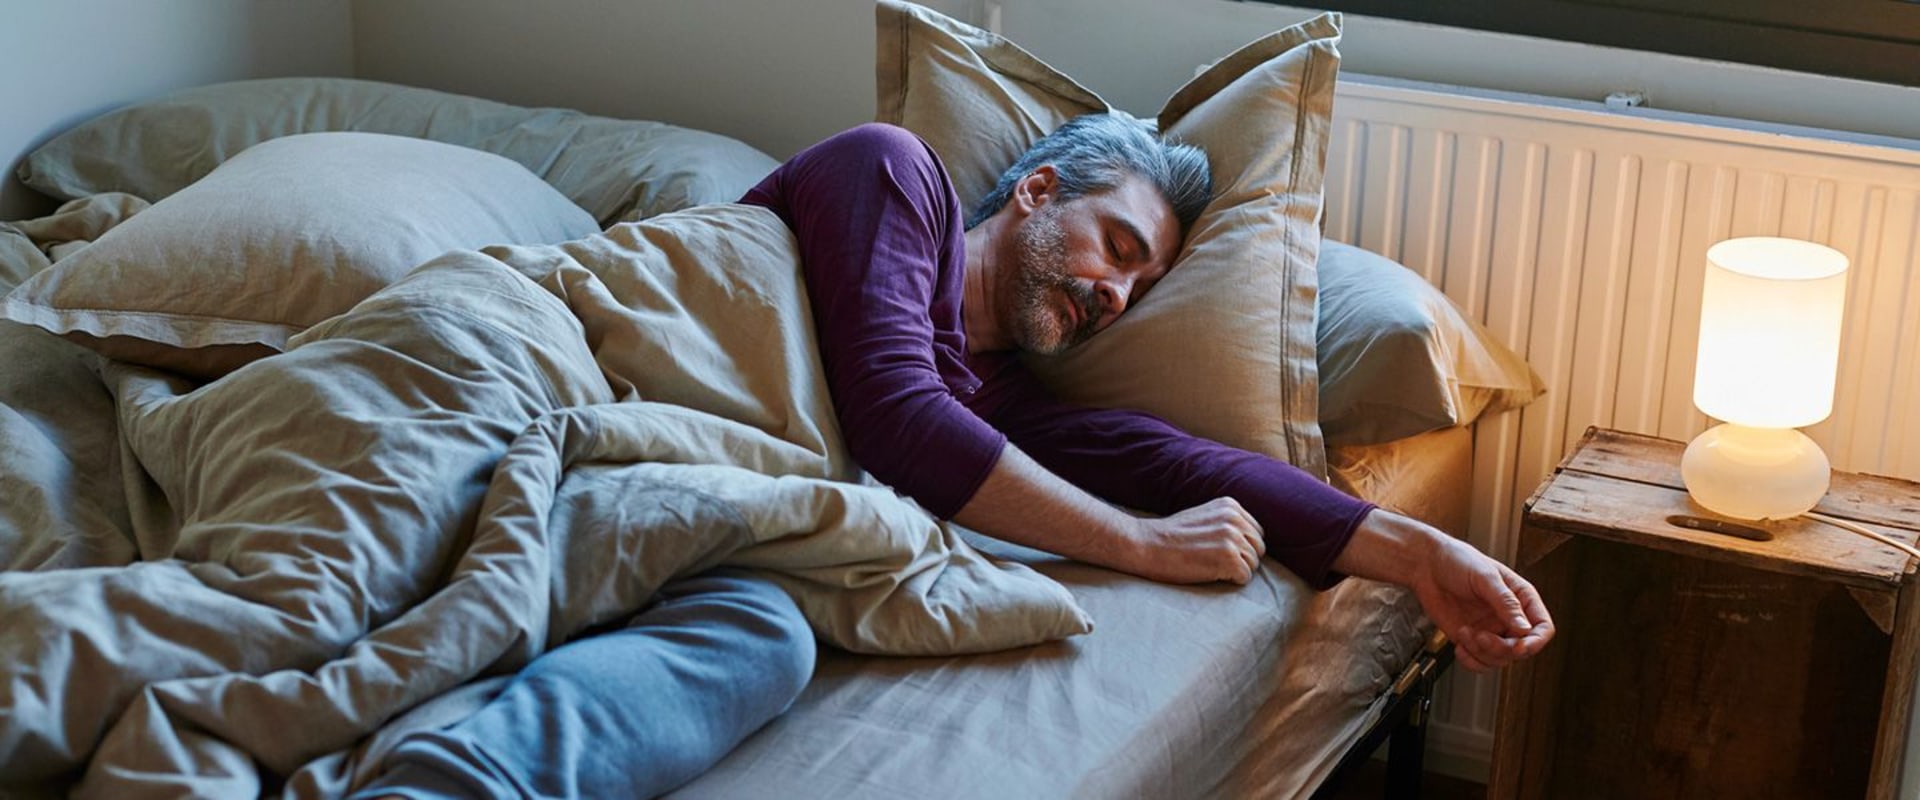 How can men reduce their risk of developing sleep disorders?